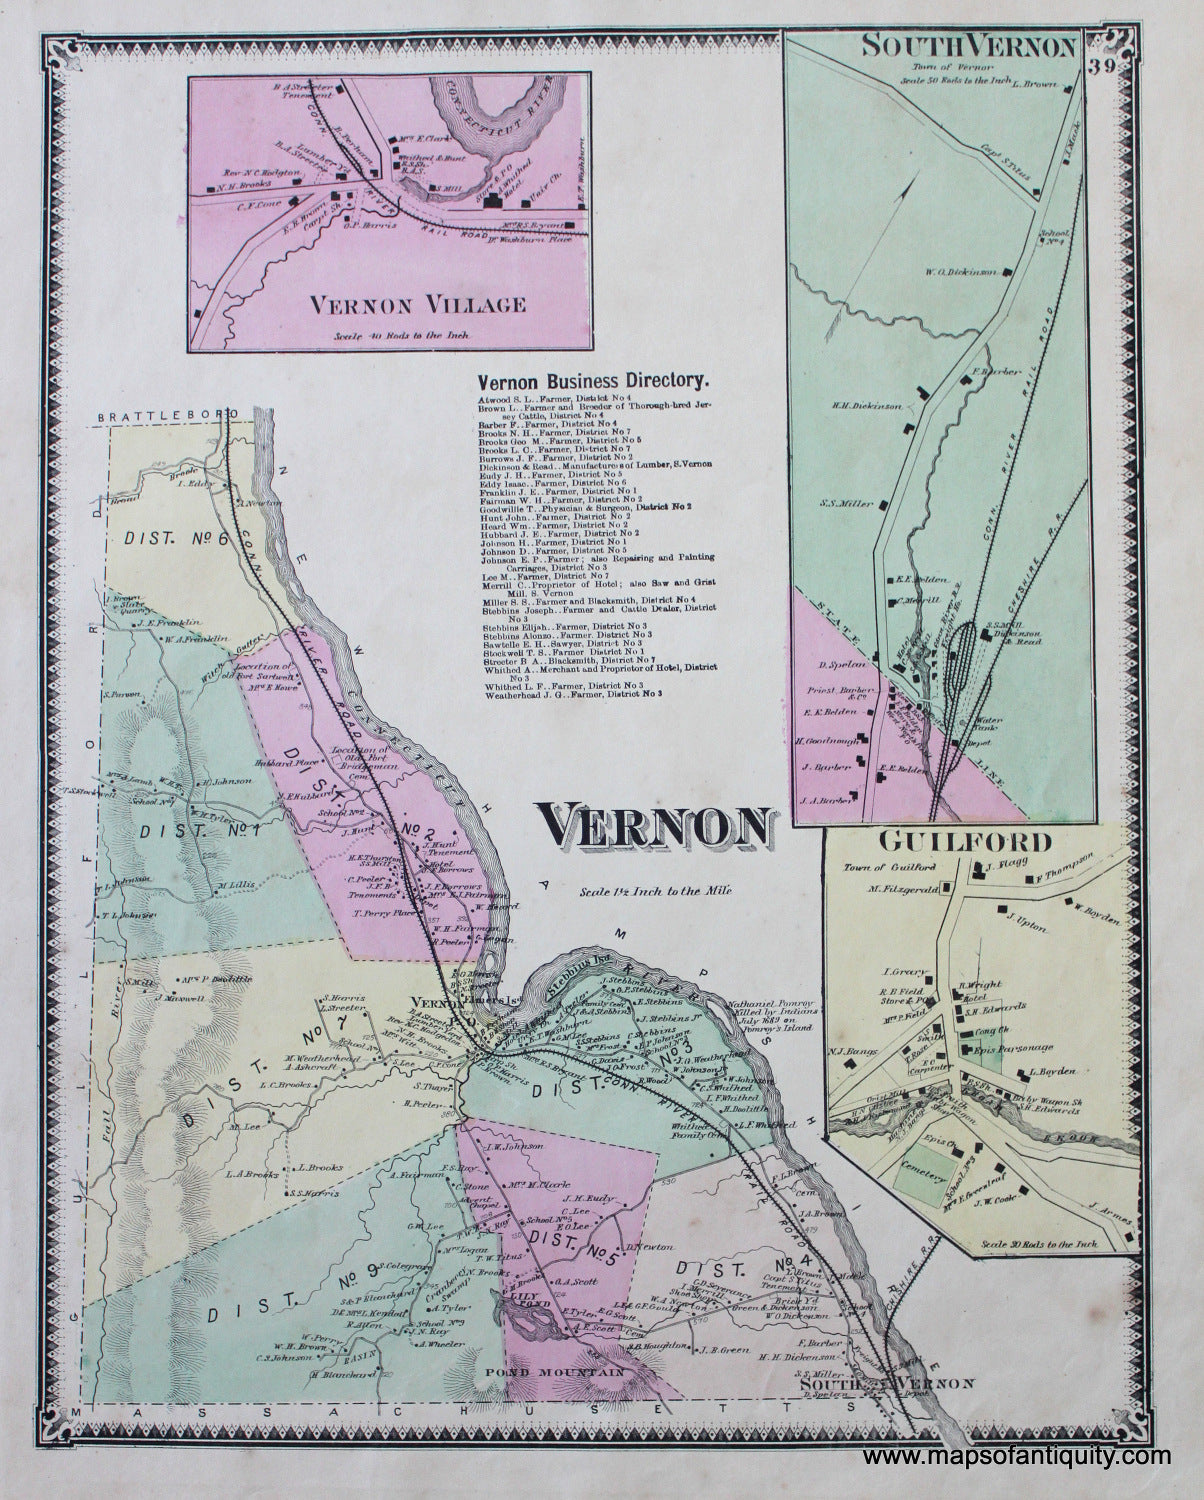 Antique-Hand-Colored-Map-Vernon-VT---Vermont-United-States-Northeast-1869-Beers-Maps-Of-Antiquity